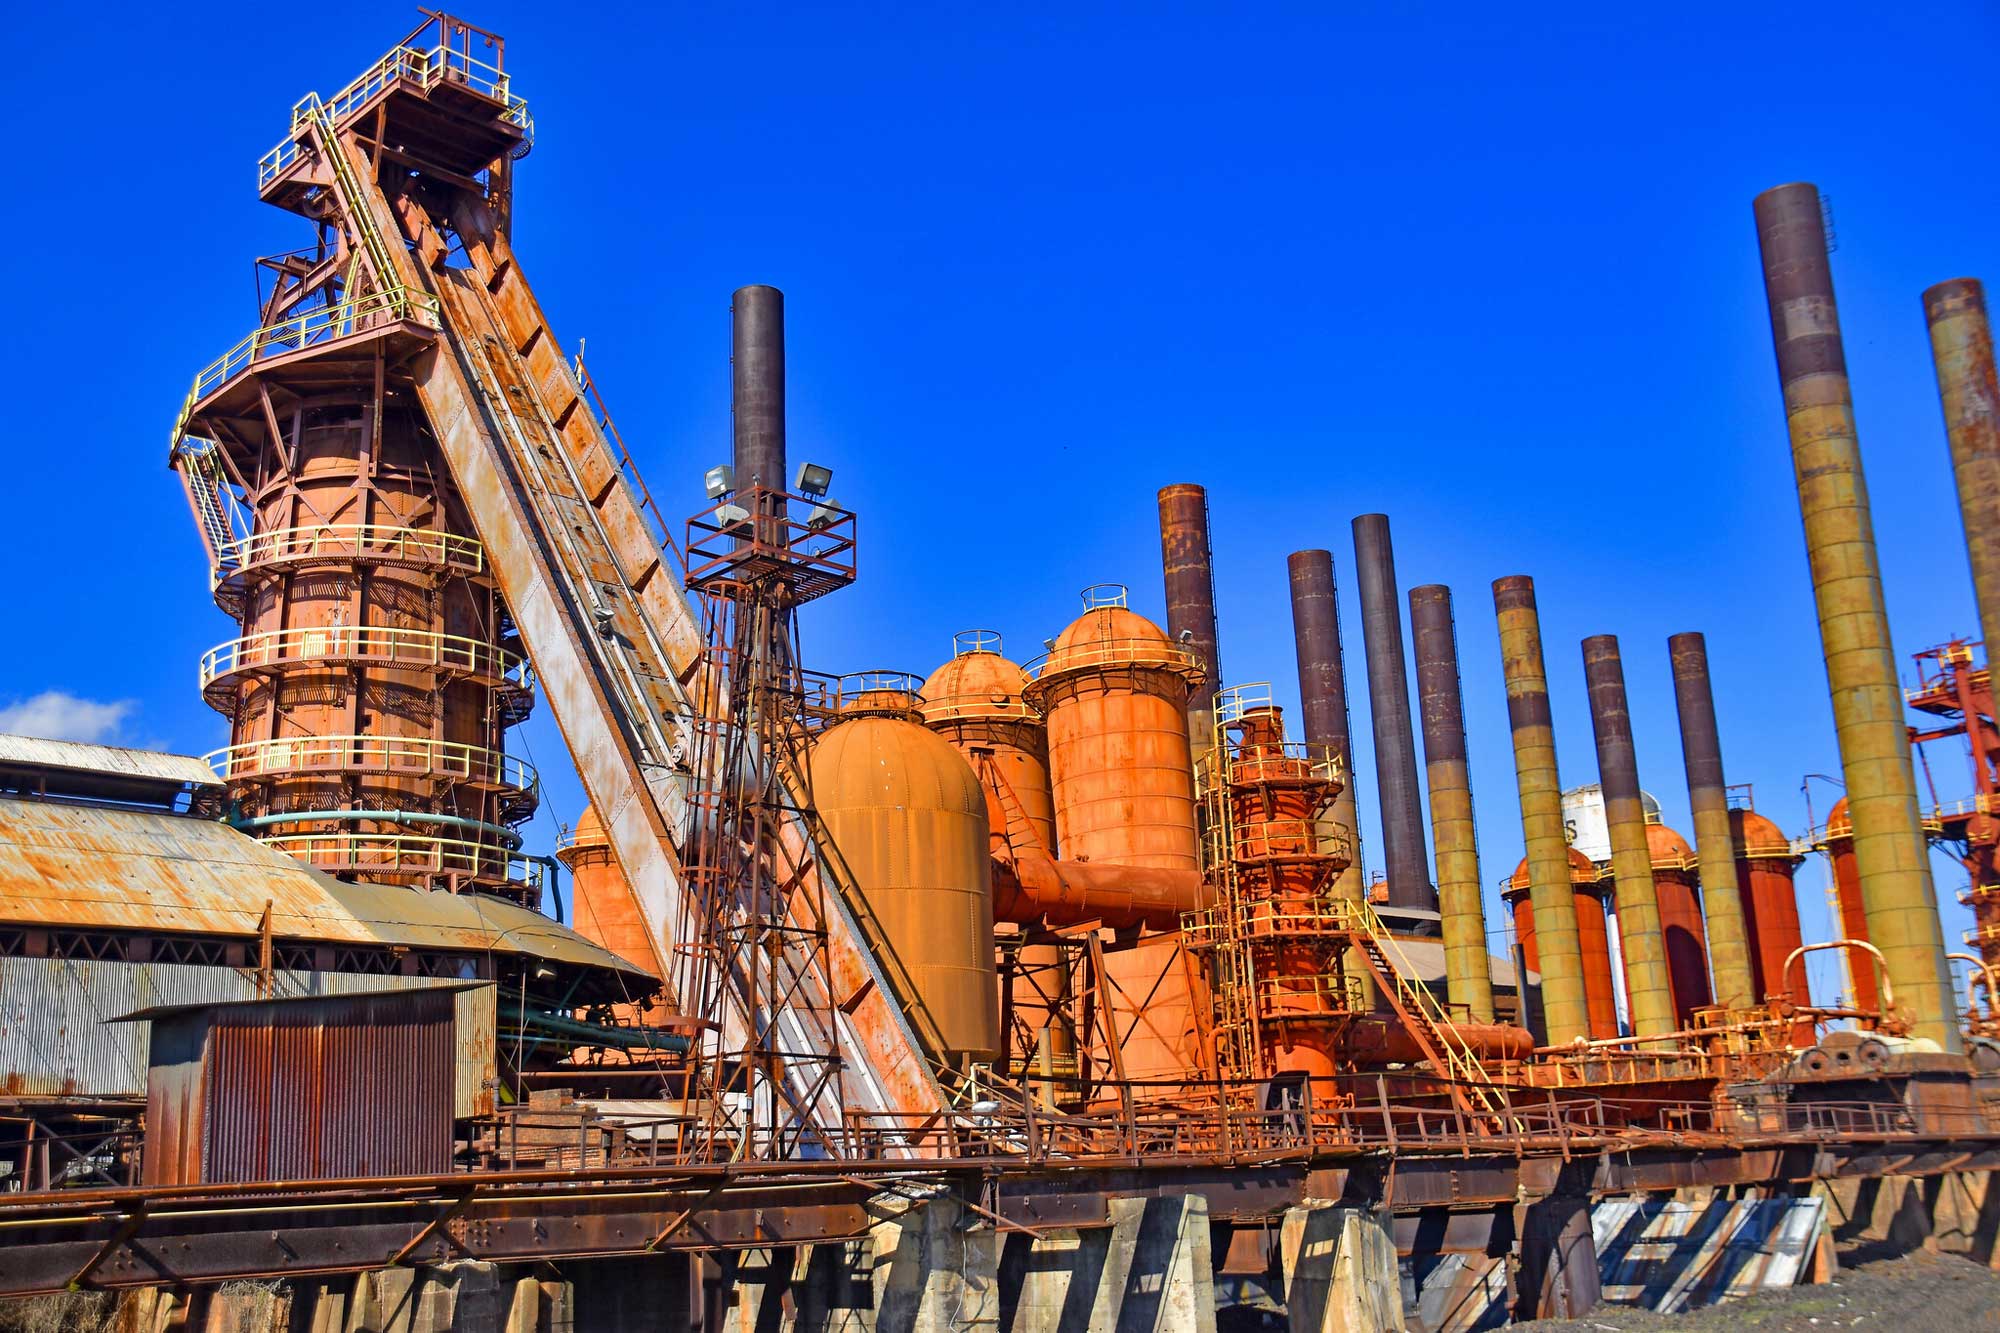 Photograph showing the Sloss Furnaces in Alabama.